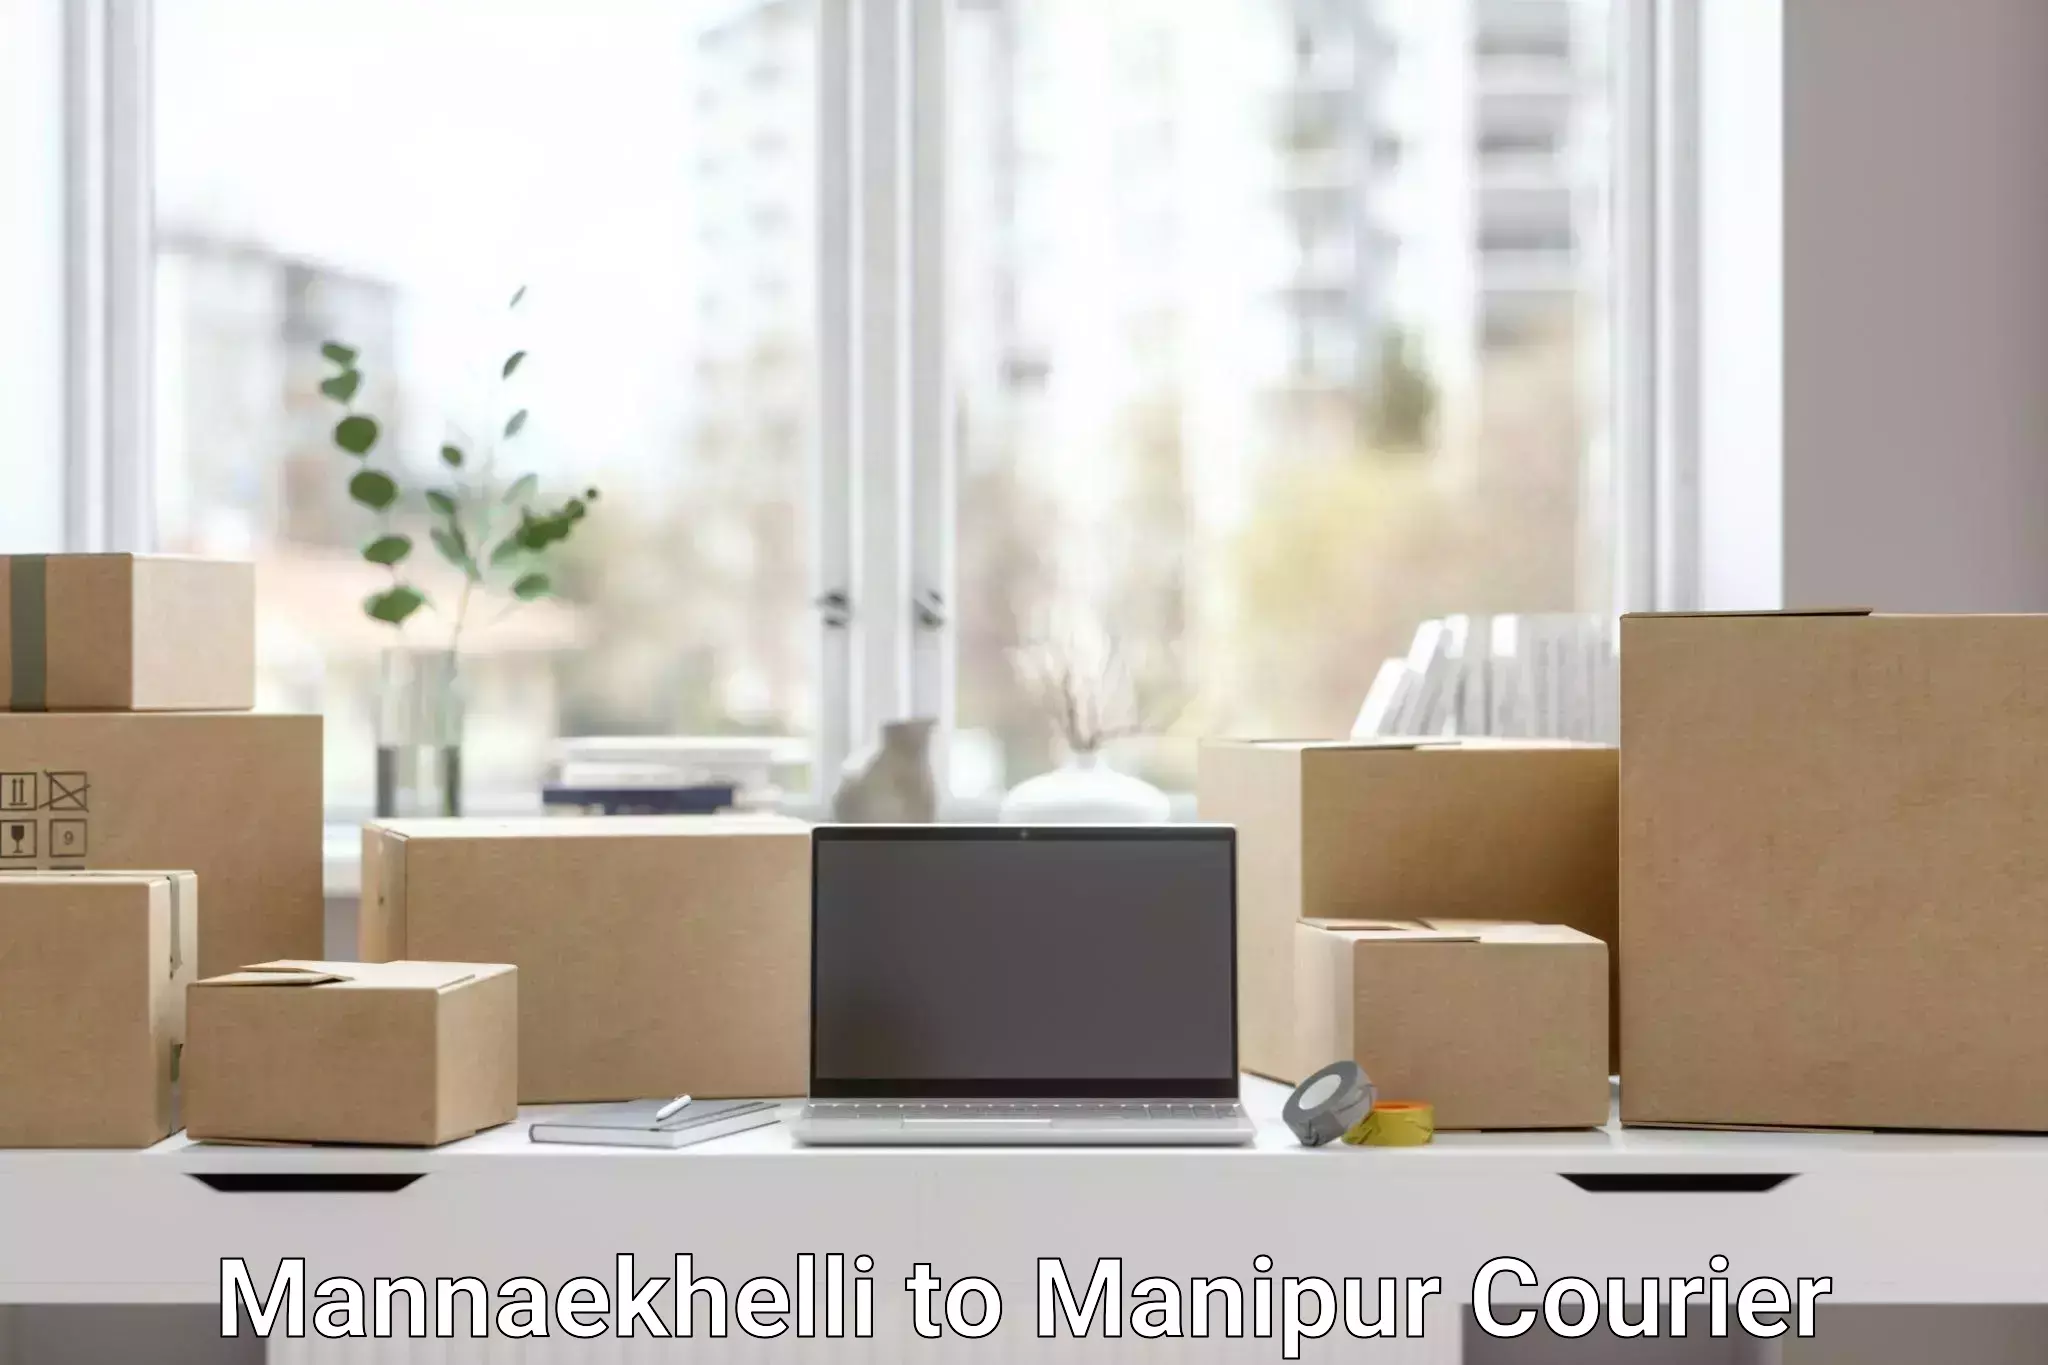 Cost-effective courier solutions Mannaekhelli to Kanti